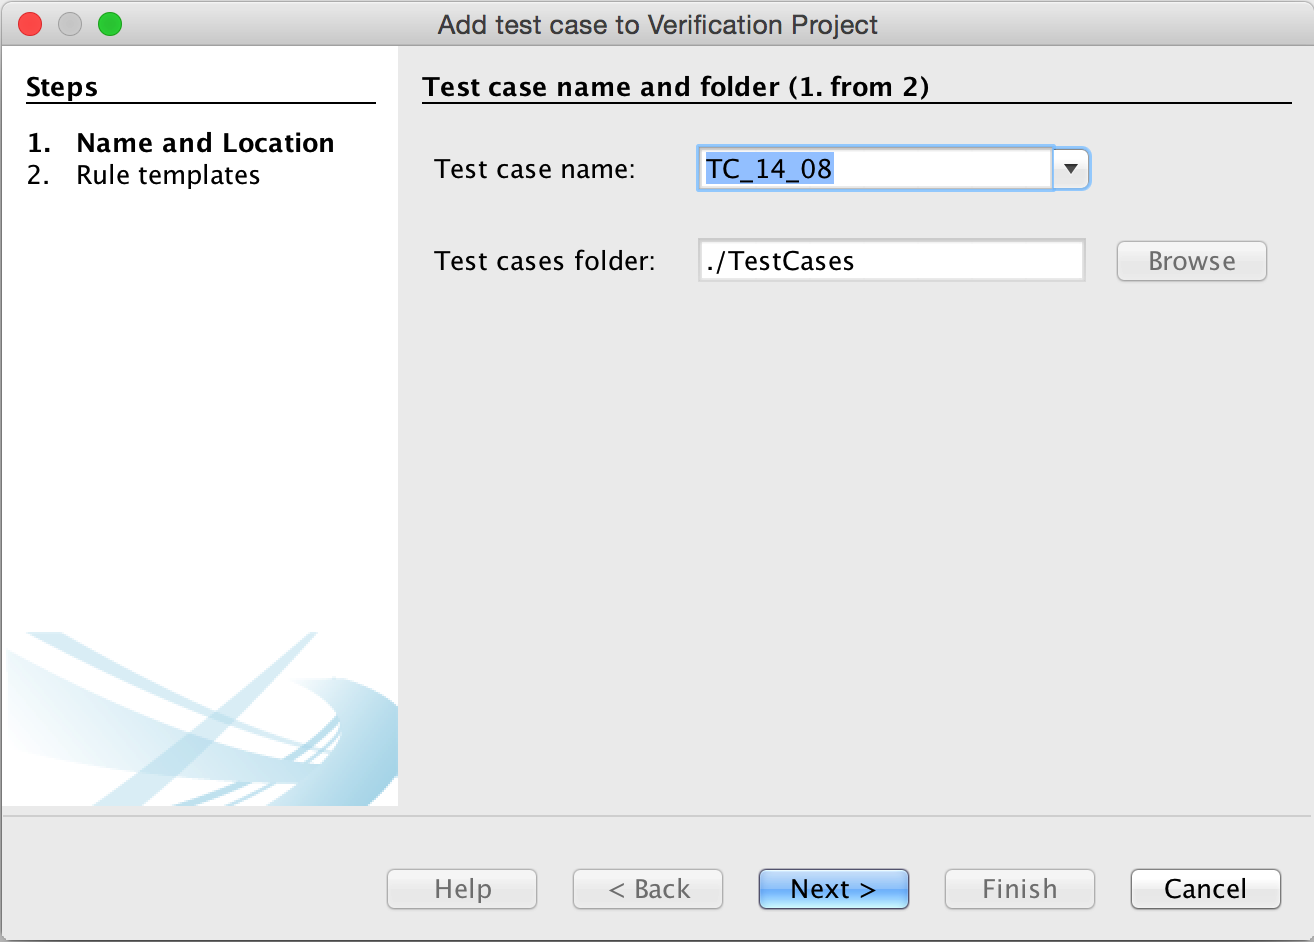 Add test case wizard - rule templates available